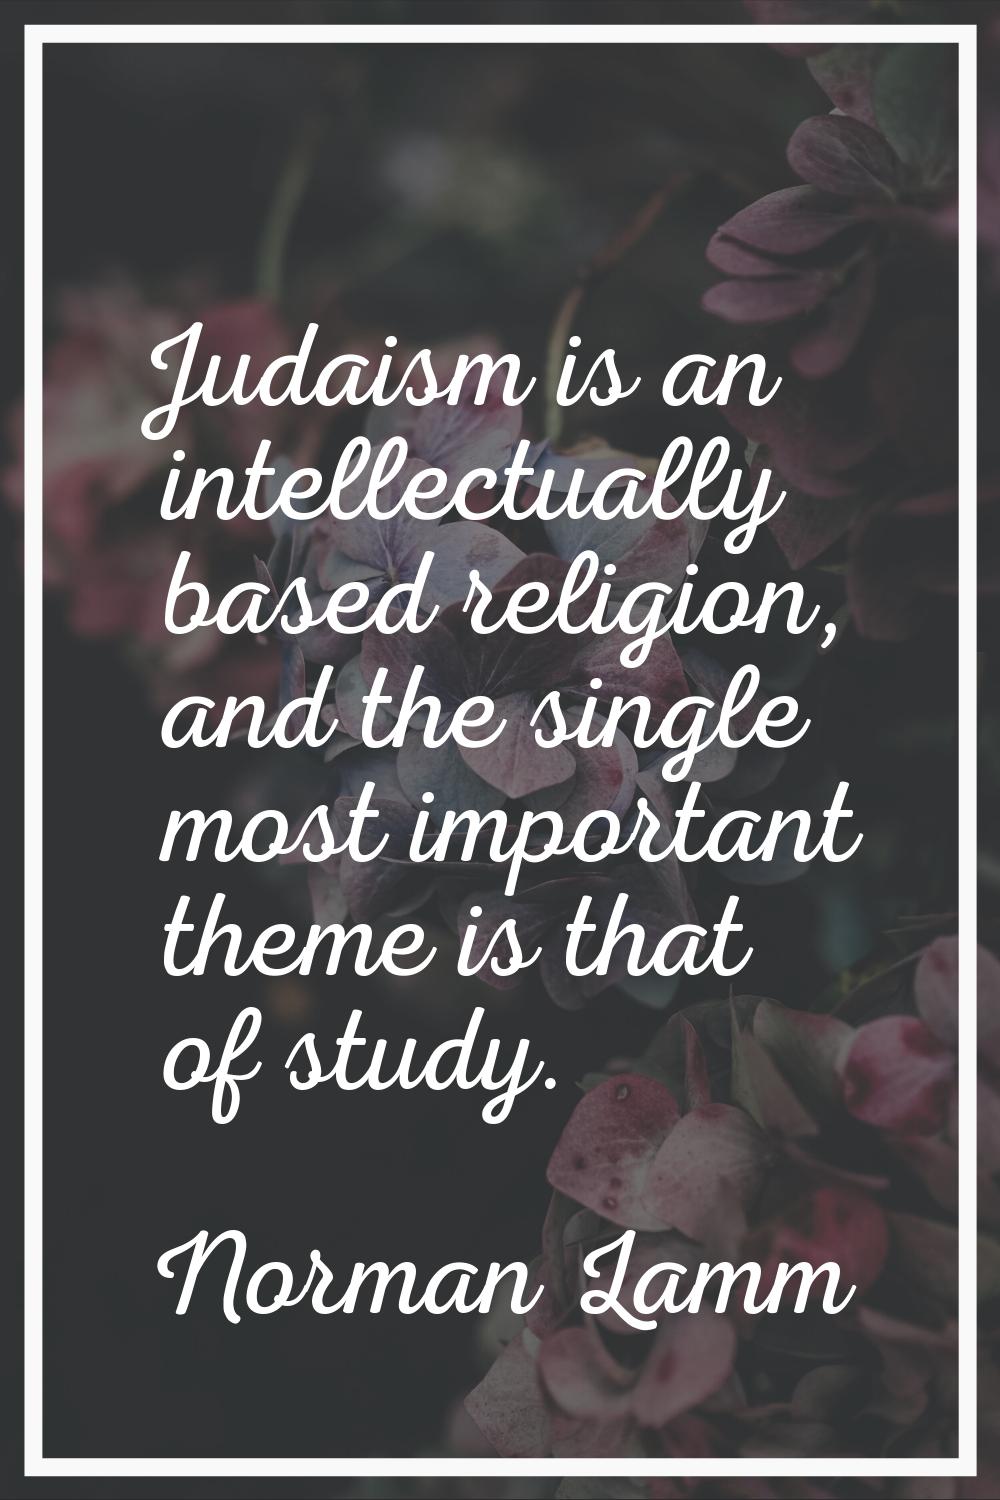 Judaism is an intellectually based religion, and the single most important theme is that of study.